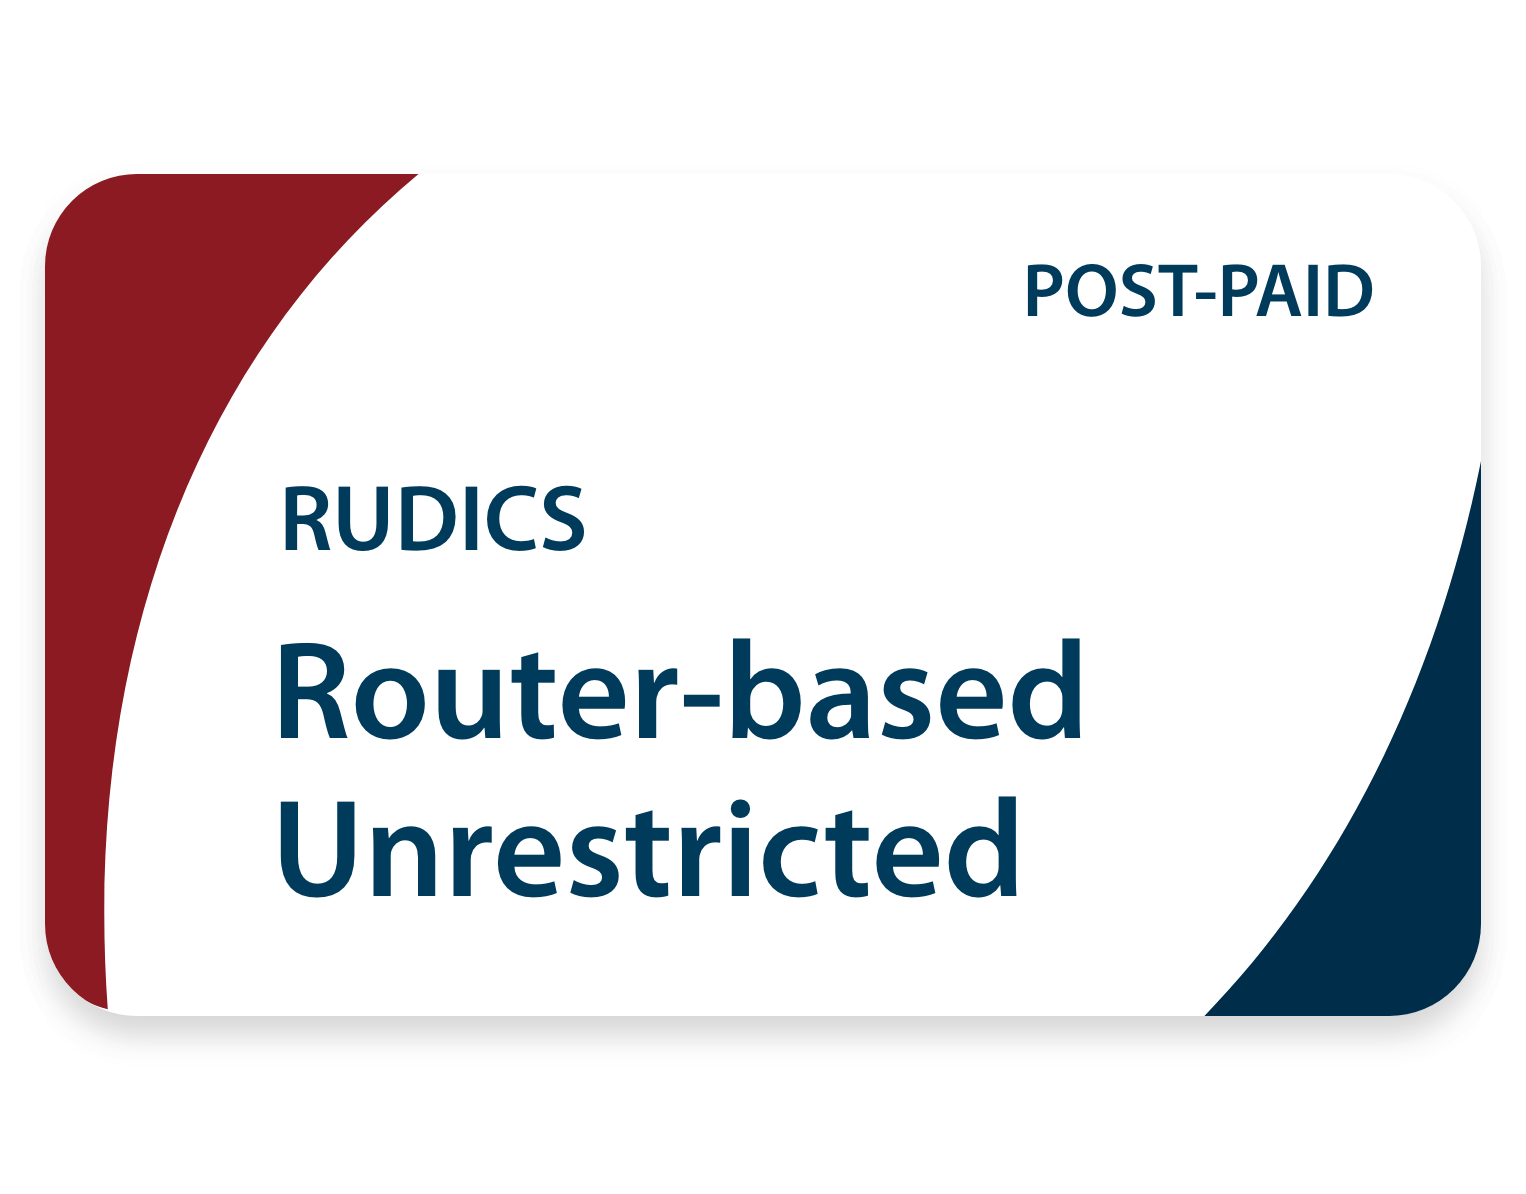 Router-based unrestricted (RUDICS) airtime plan